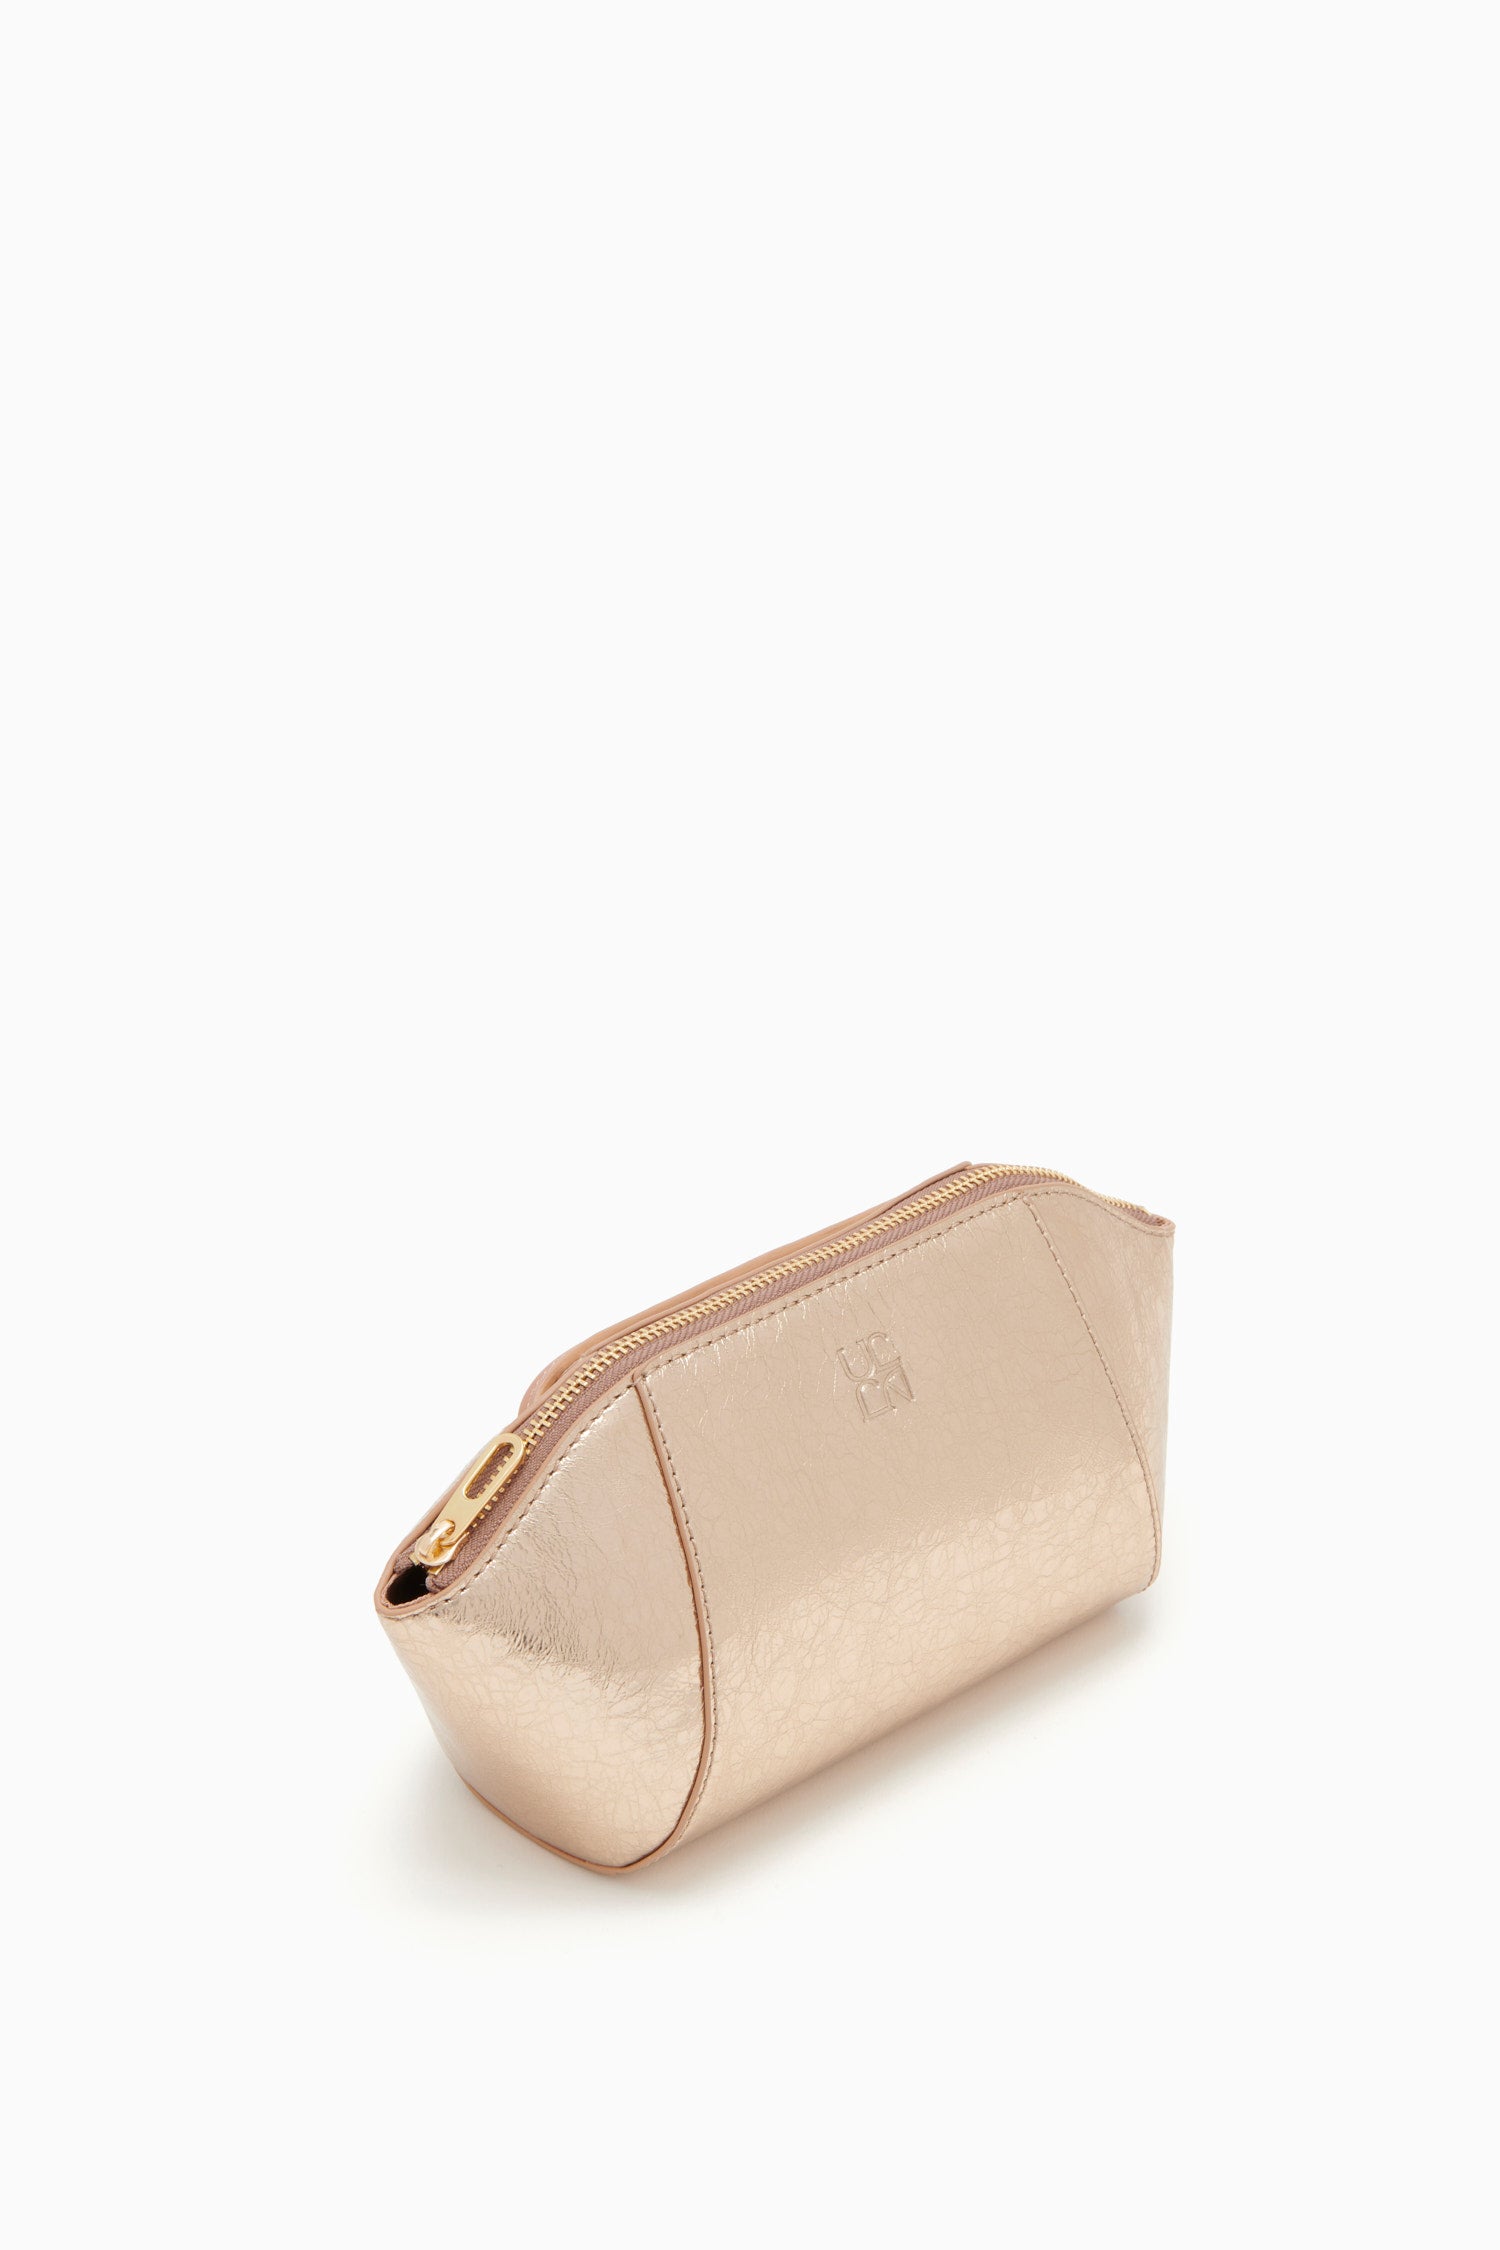 Ulla Johnson Imogen Large Makeup Pouch - Champagne